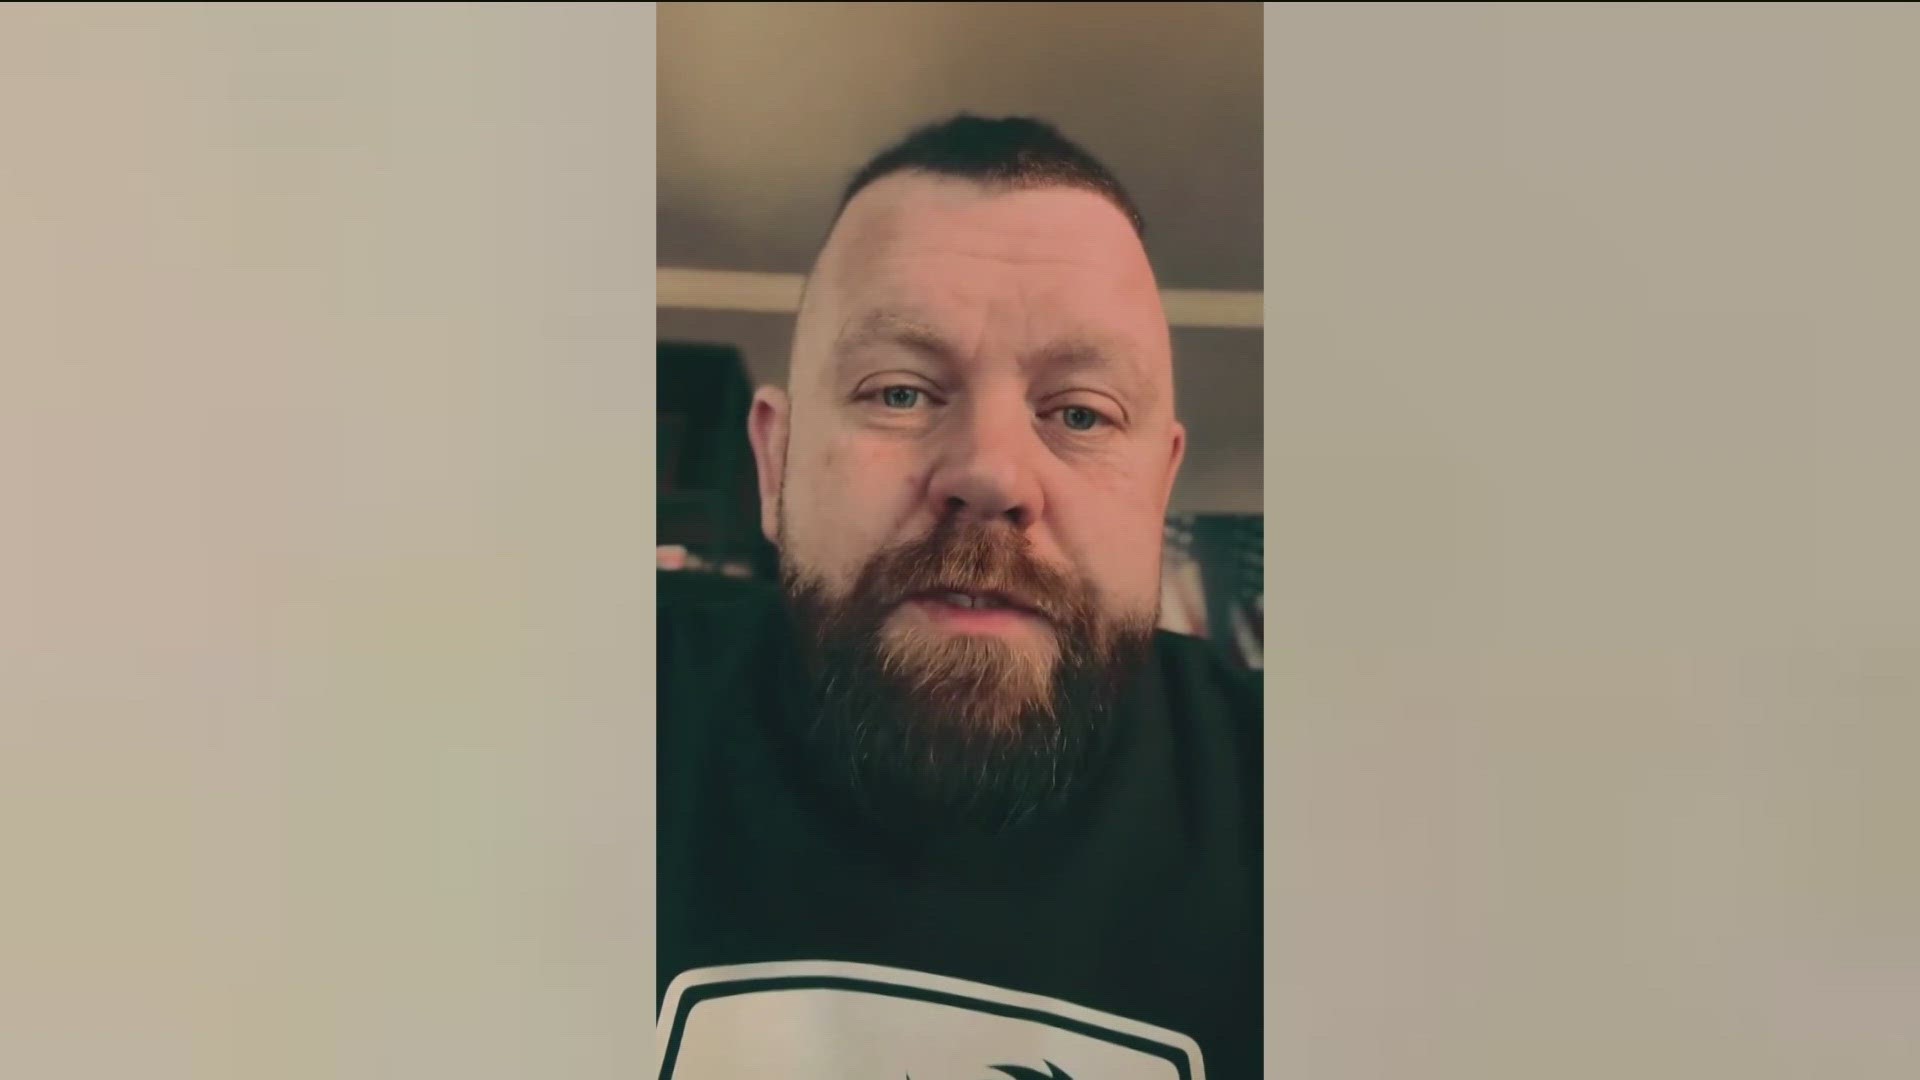 J.R. Majewski posted an apology video to social media on Sunday, but some, like the executive director of The Ability Center, have doubts about Majewski's sincerity.